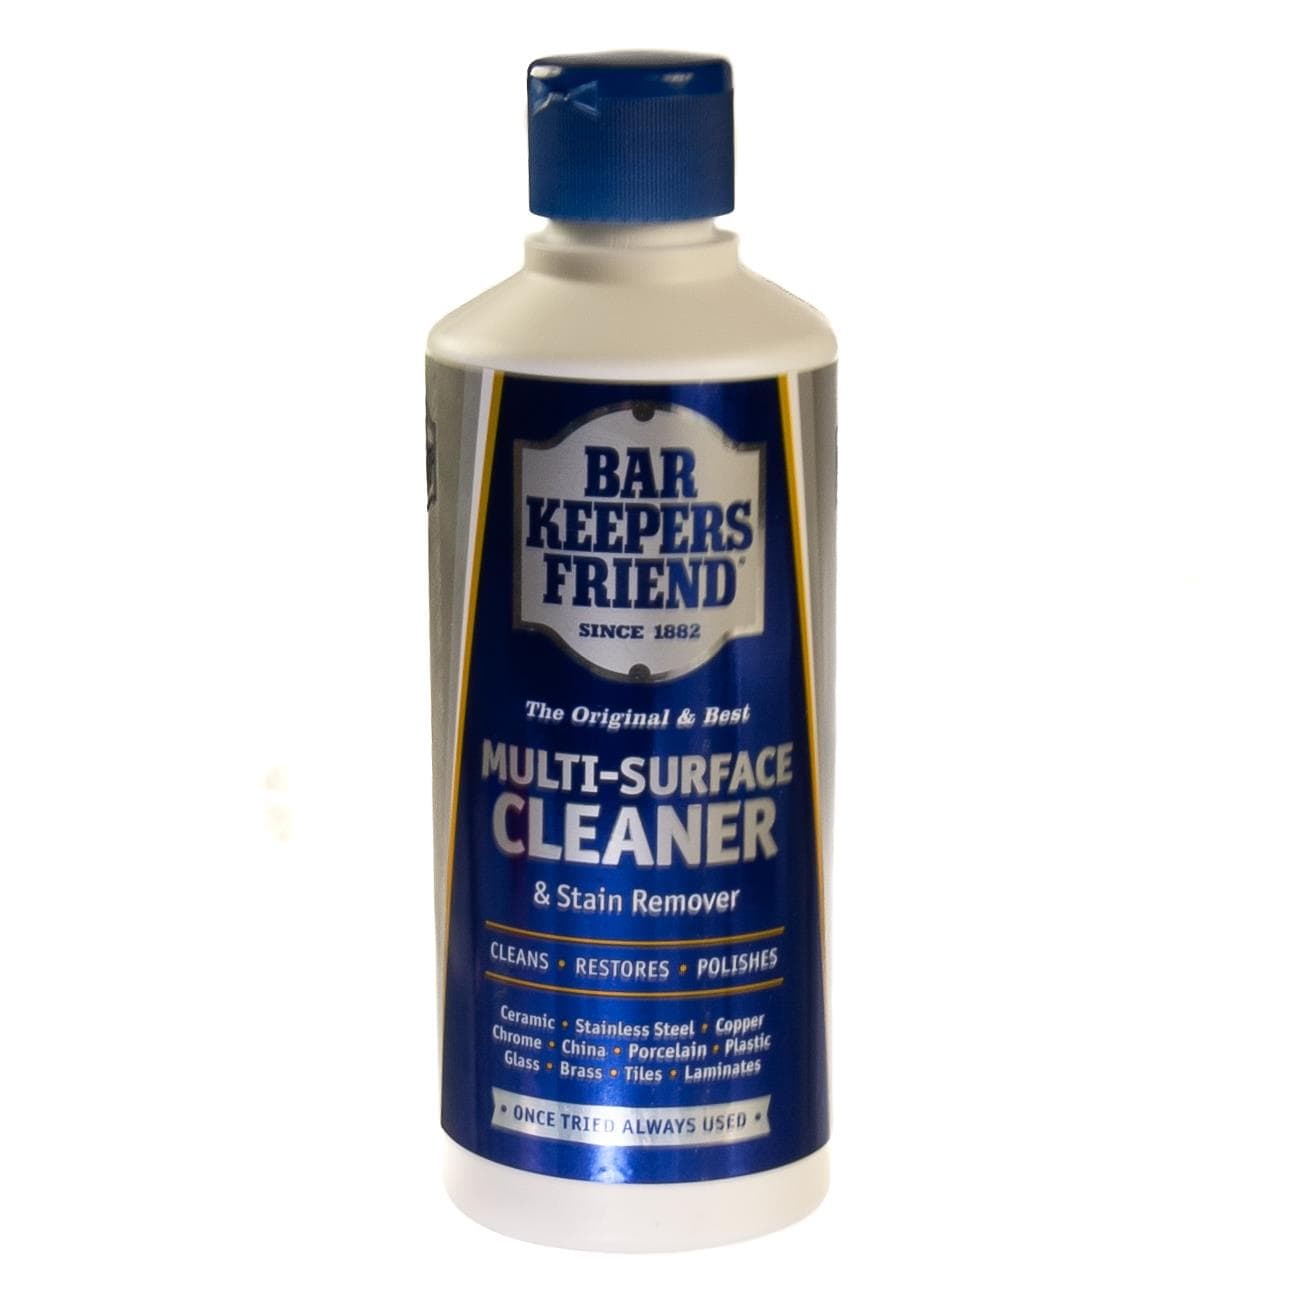 Bar Keepers Friend Original Powder 250g Multi-Surface Cleaner and